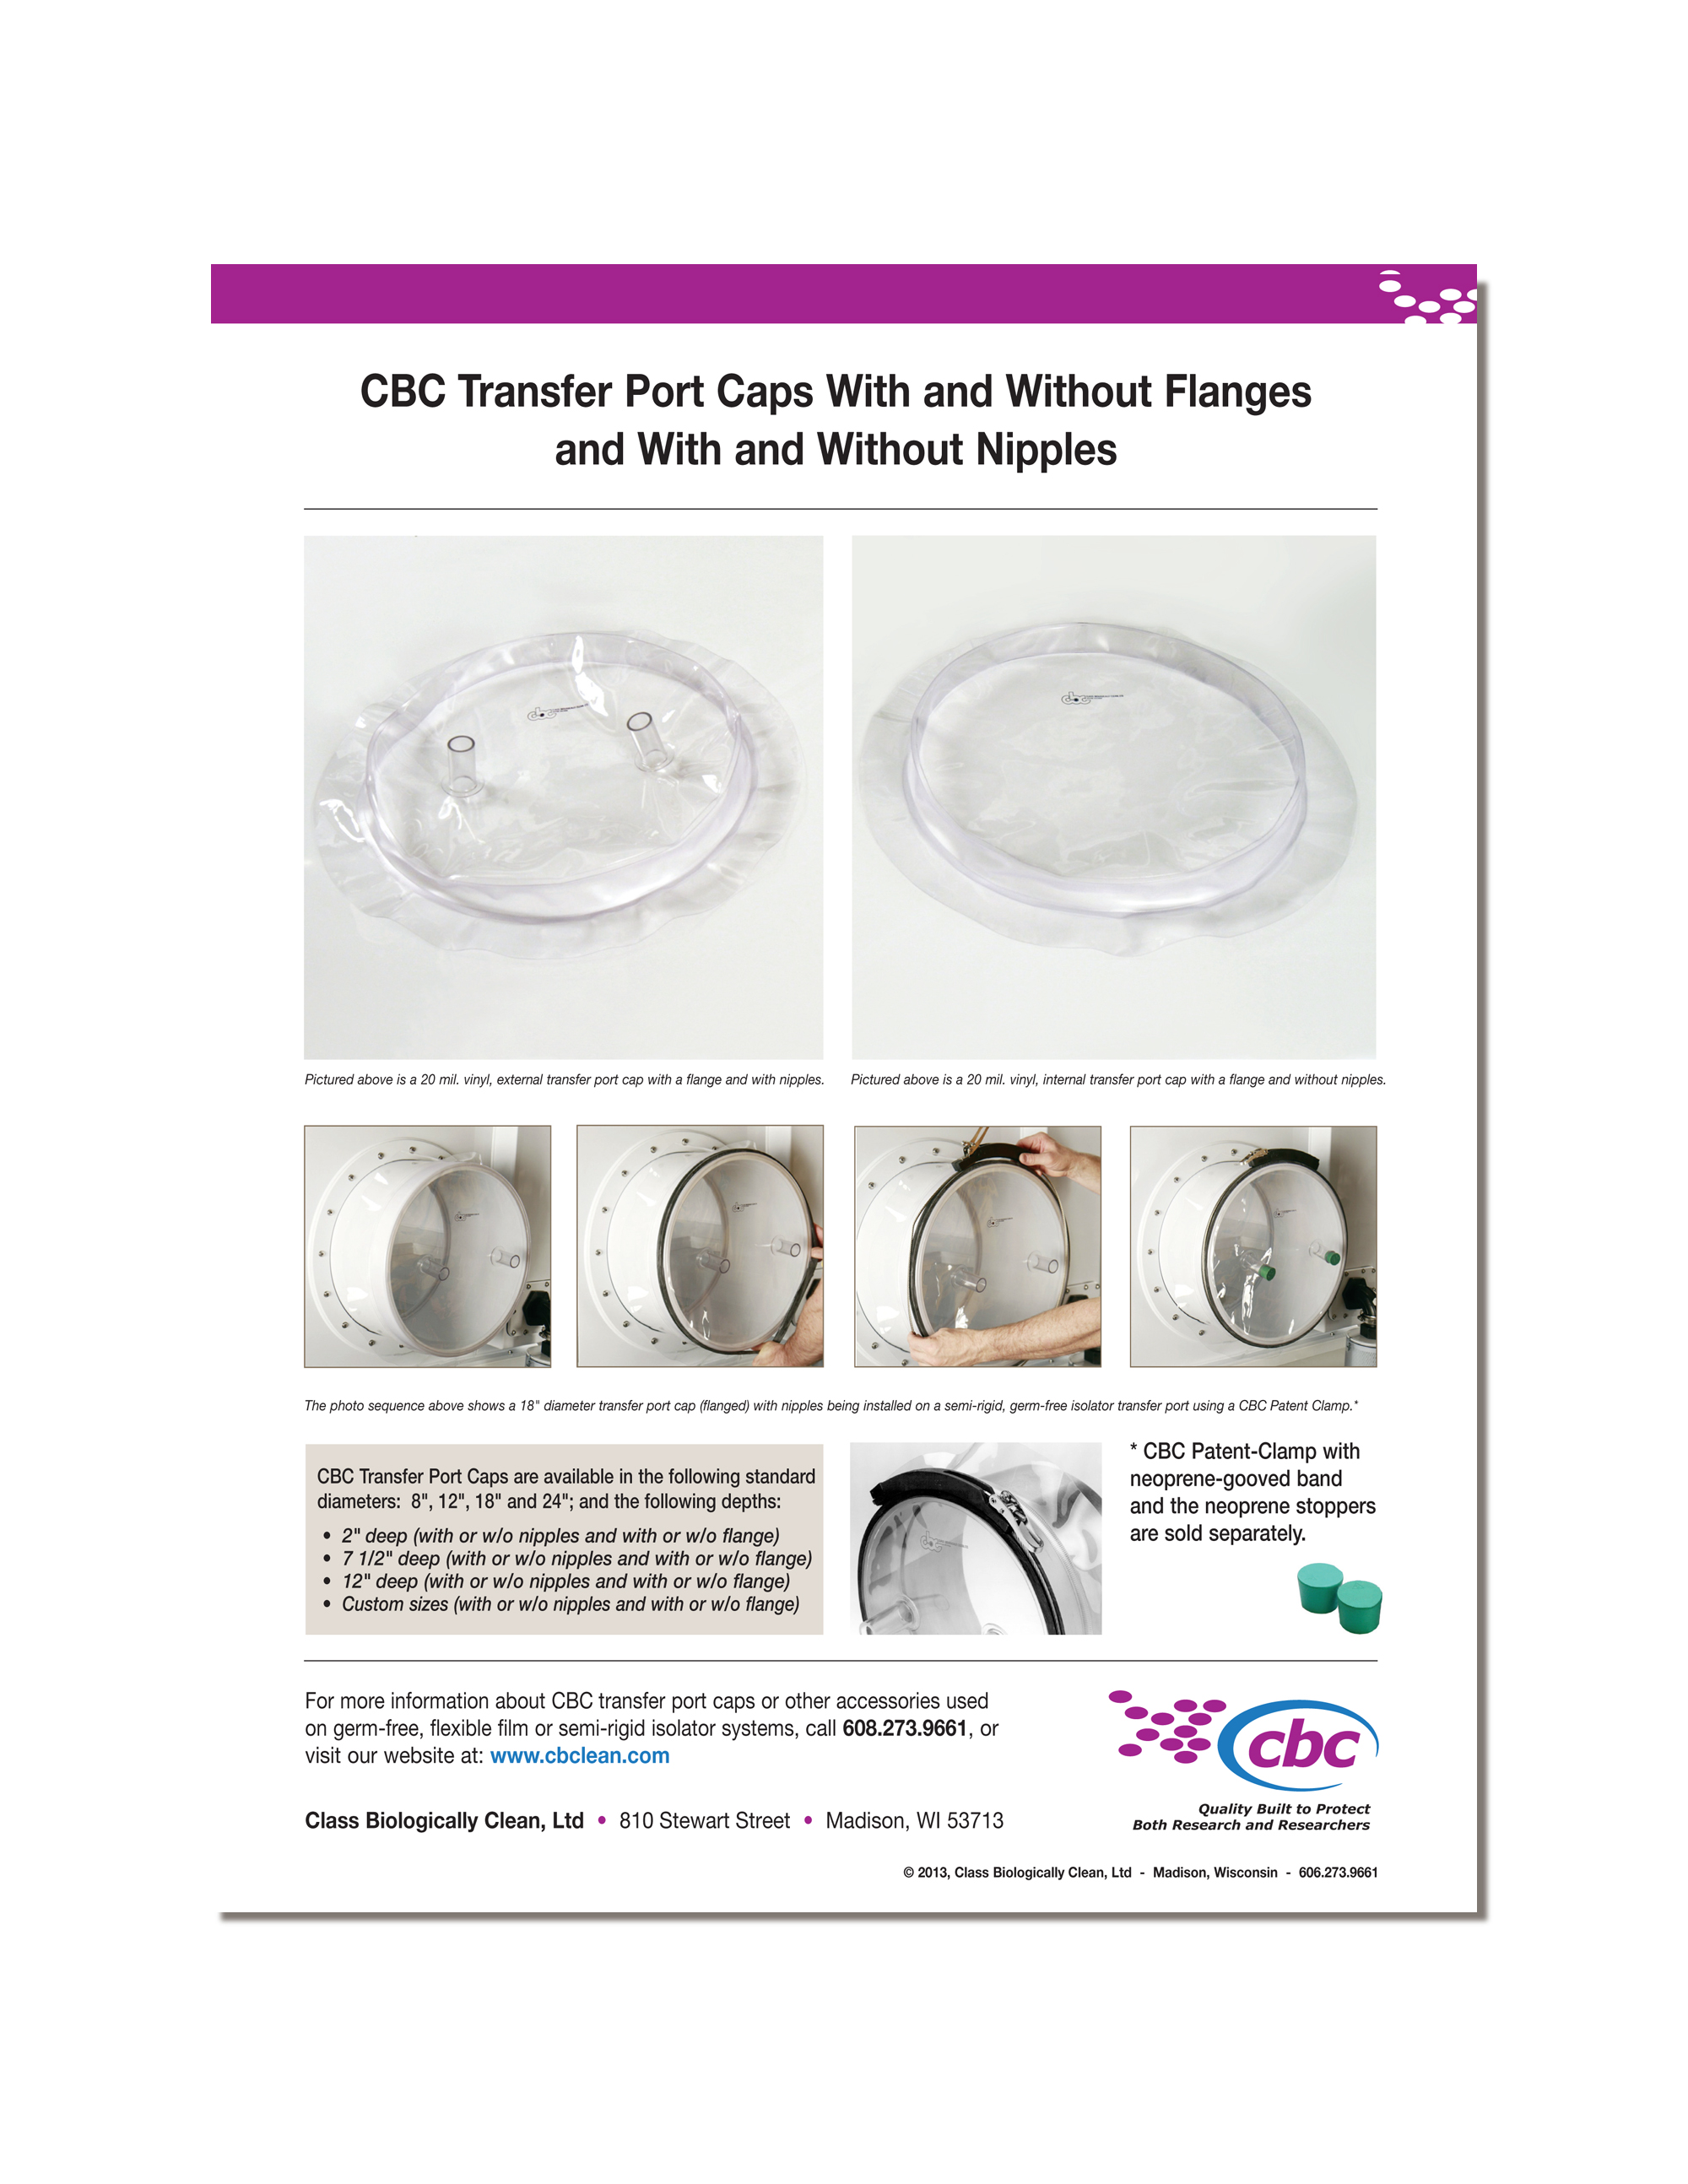 Download a printable flyer about CBC's Transfer Port Caps. Click here to download flyer.